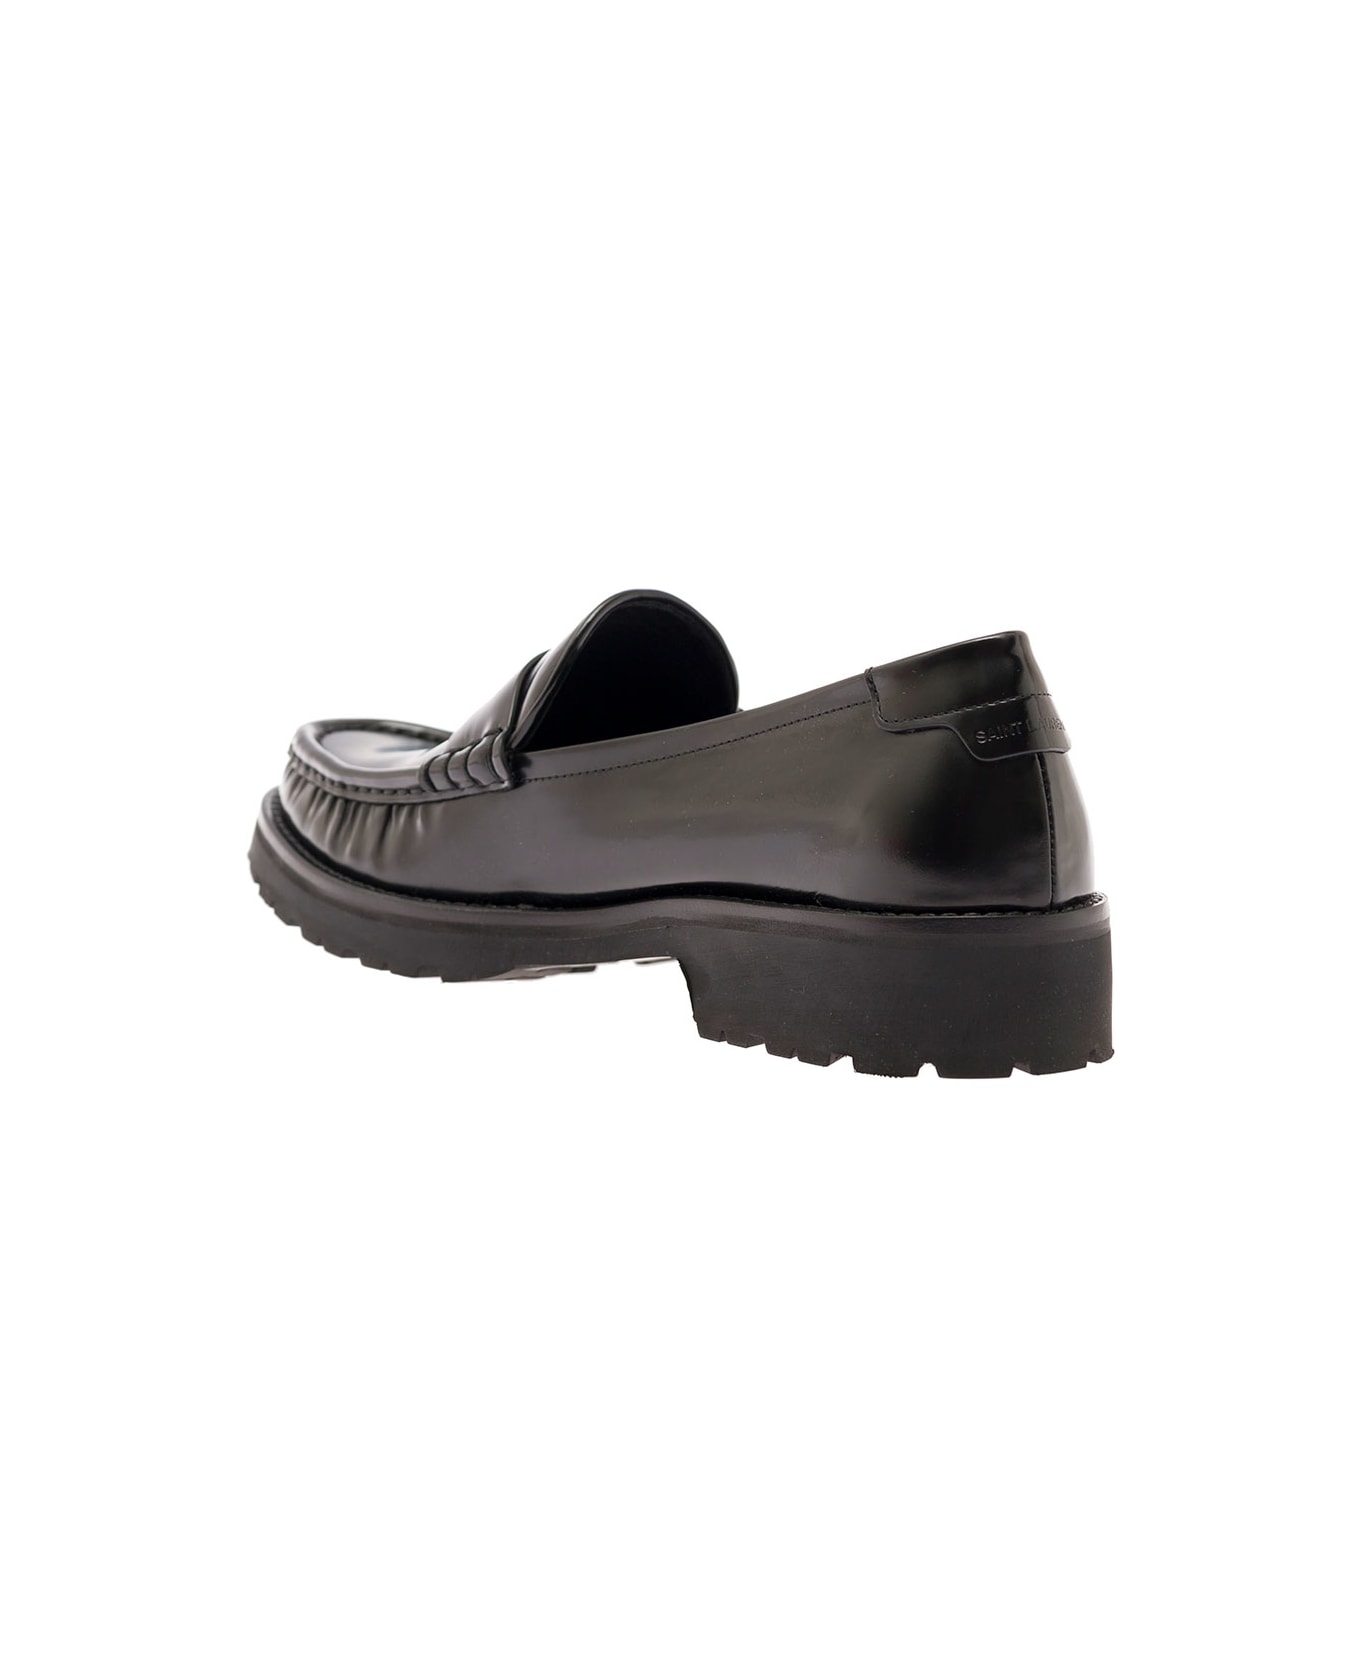 Saint Laurent Black Loafers With Platform And Ysl Logo In Leather Man - Nero